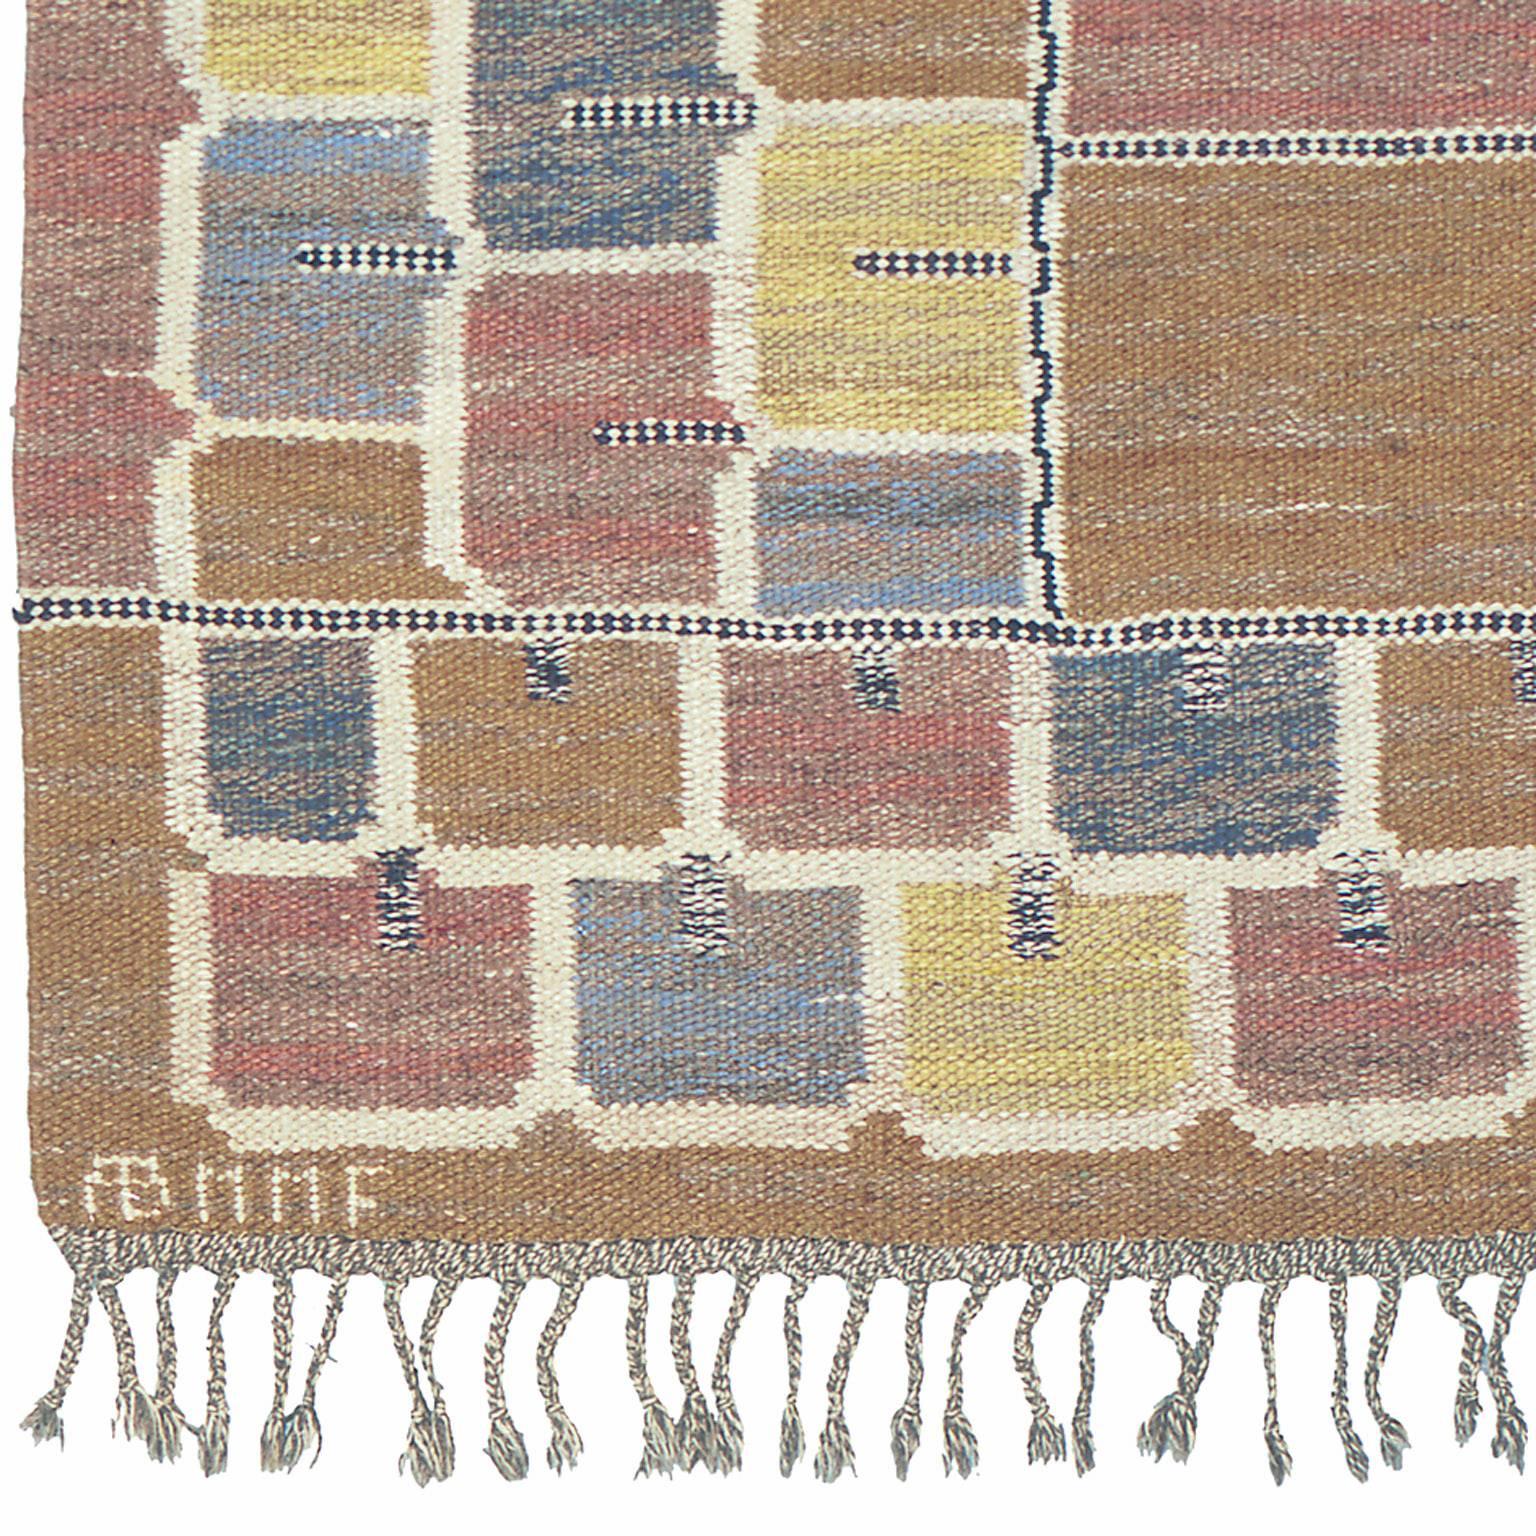 Mid-20th century Swedish flat-weave carpet. 
Initialed: AB MMF (AB Märta Måås-Fjetterström)
Sweden ca. 1937
Handwoven
